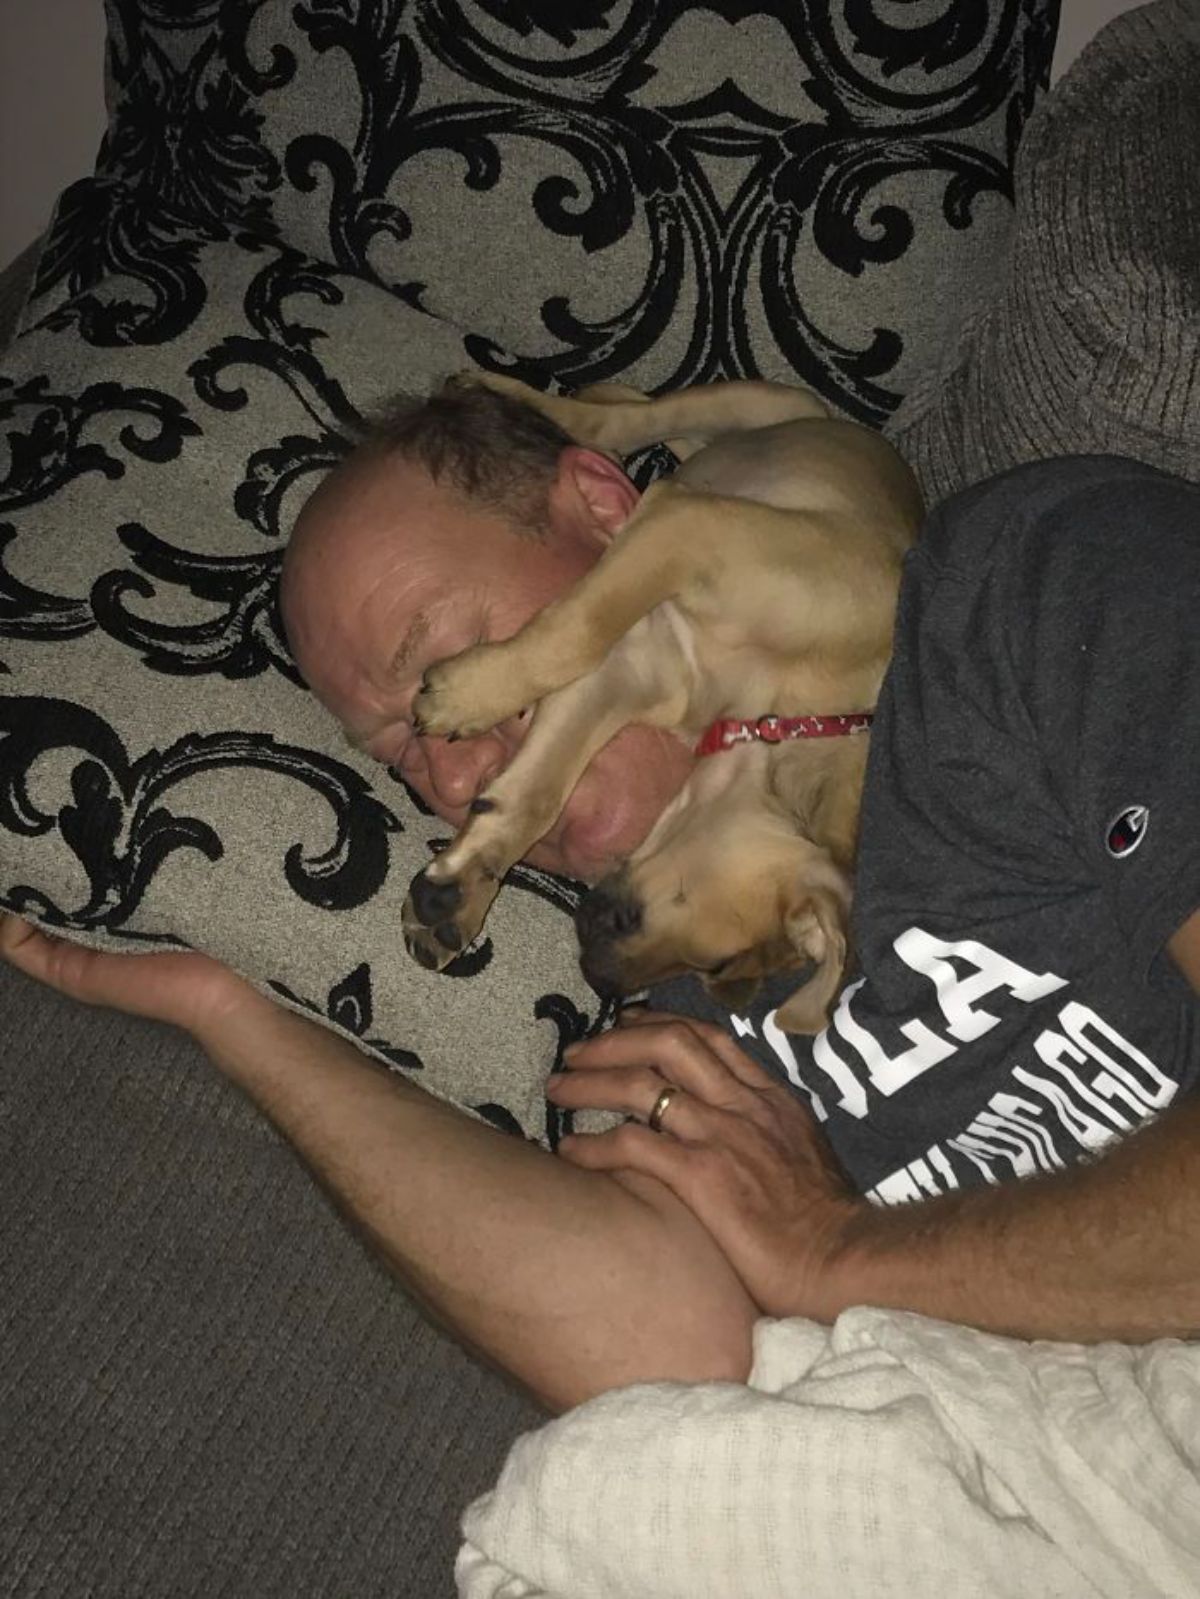 brown puppy sleeping on a sleeping man's neck with the puppy's legs on the man's face